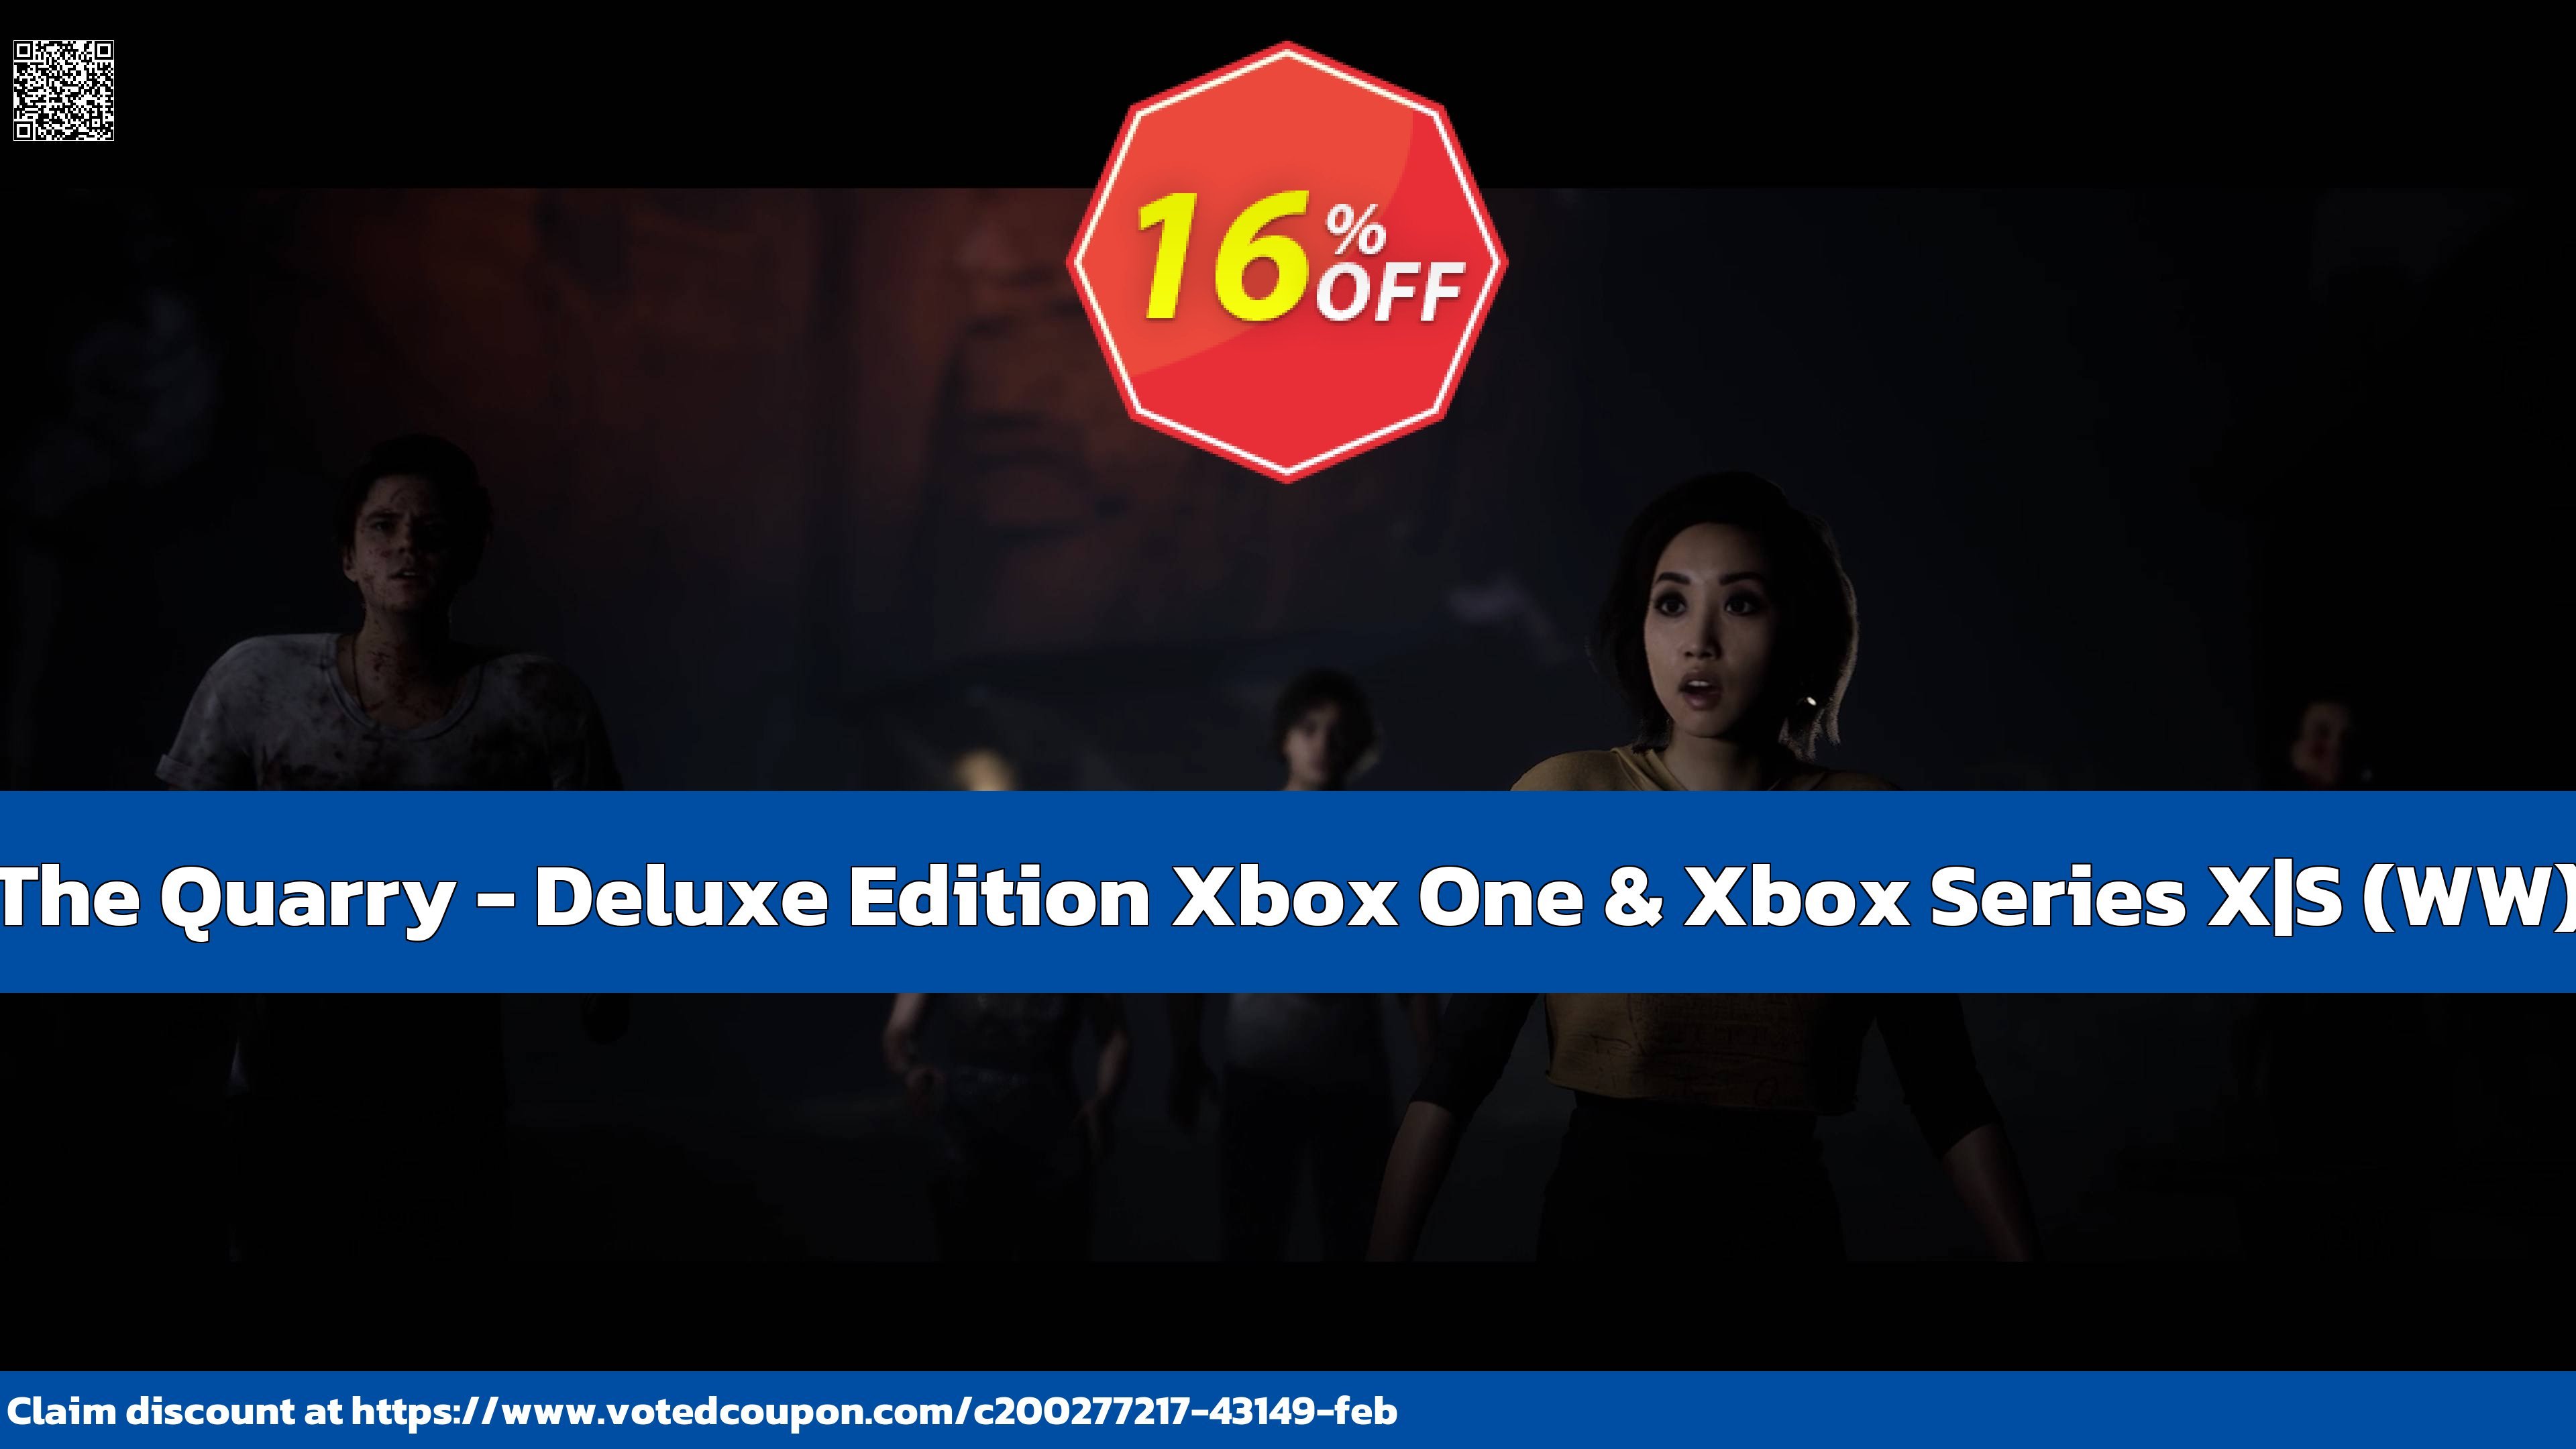 The Quarry - Deluxe Edition Xbox One & Xbox Series X|S, WW  Coupon Code May 2024, 16% OFF - VotedCoupon